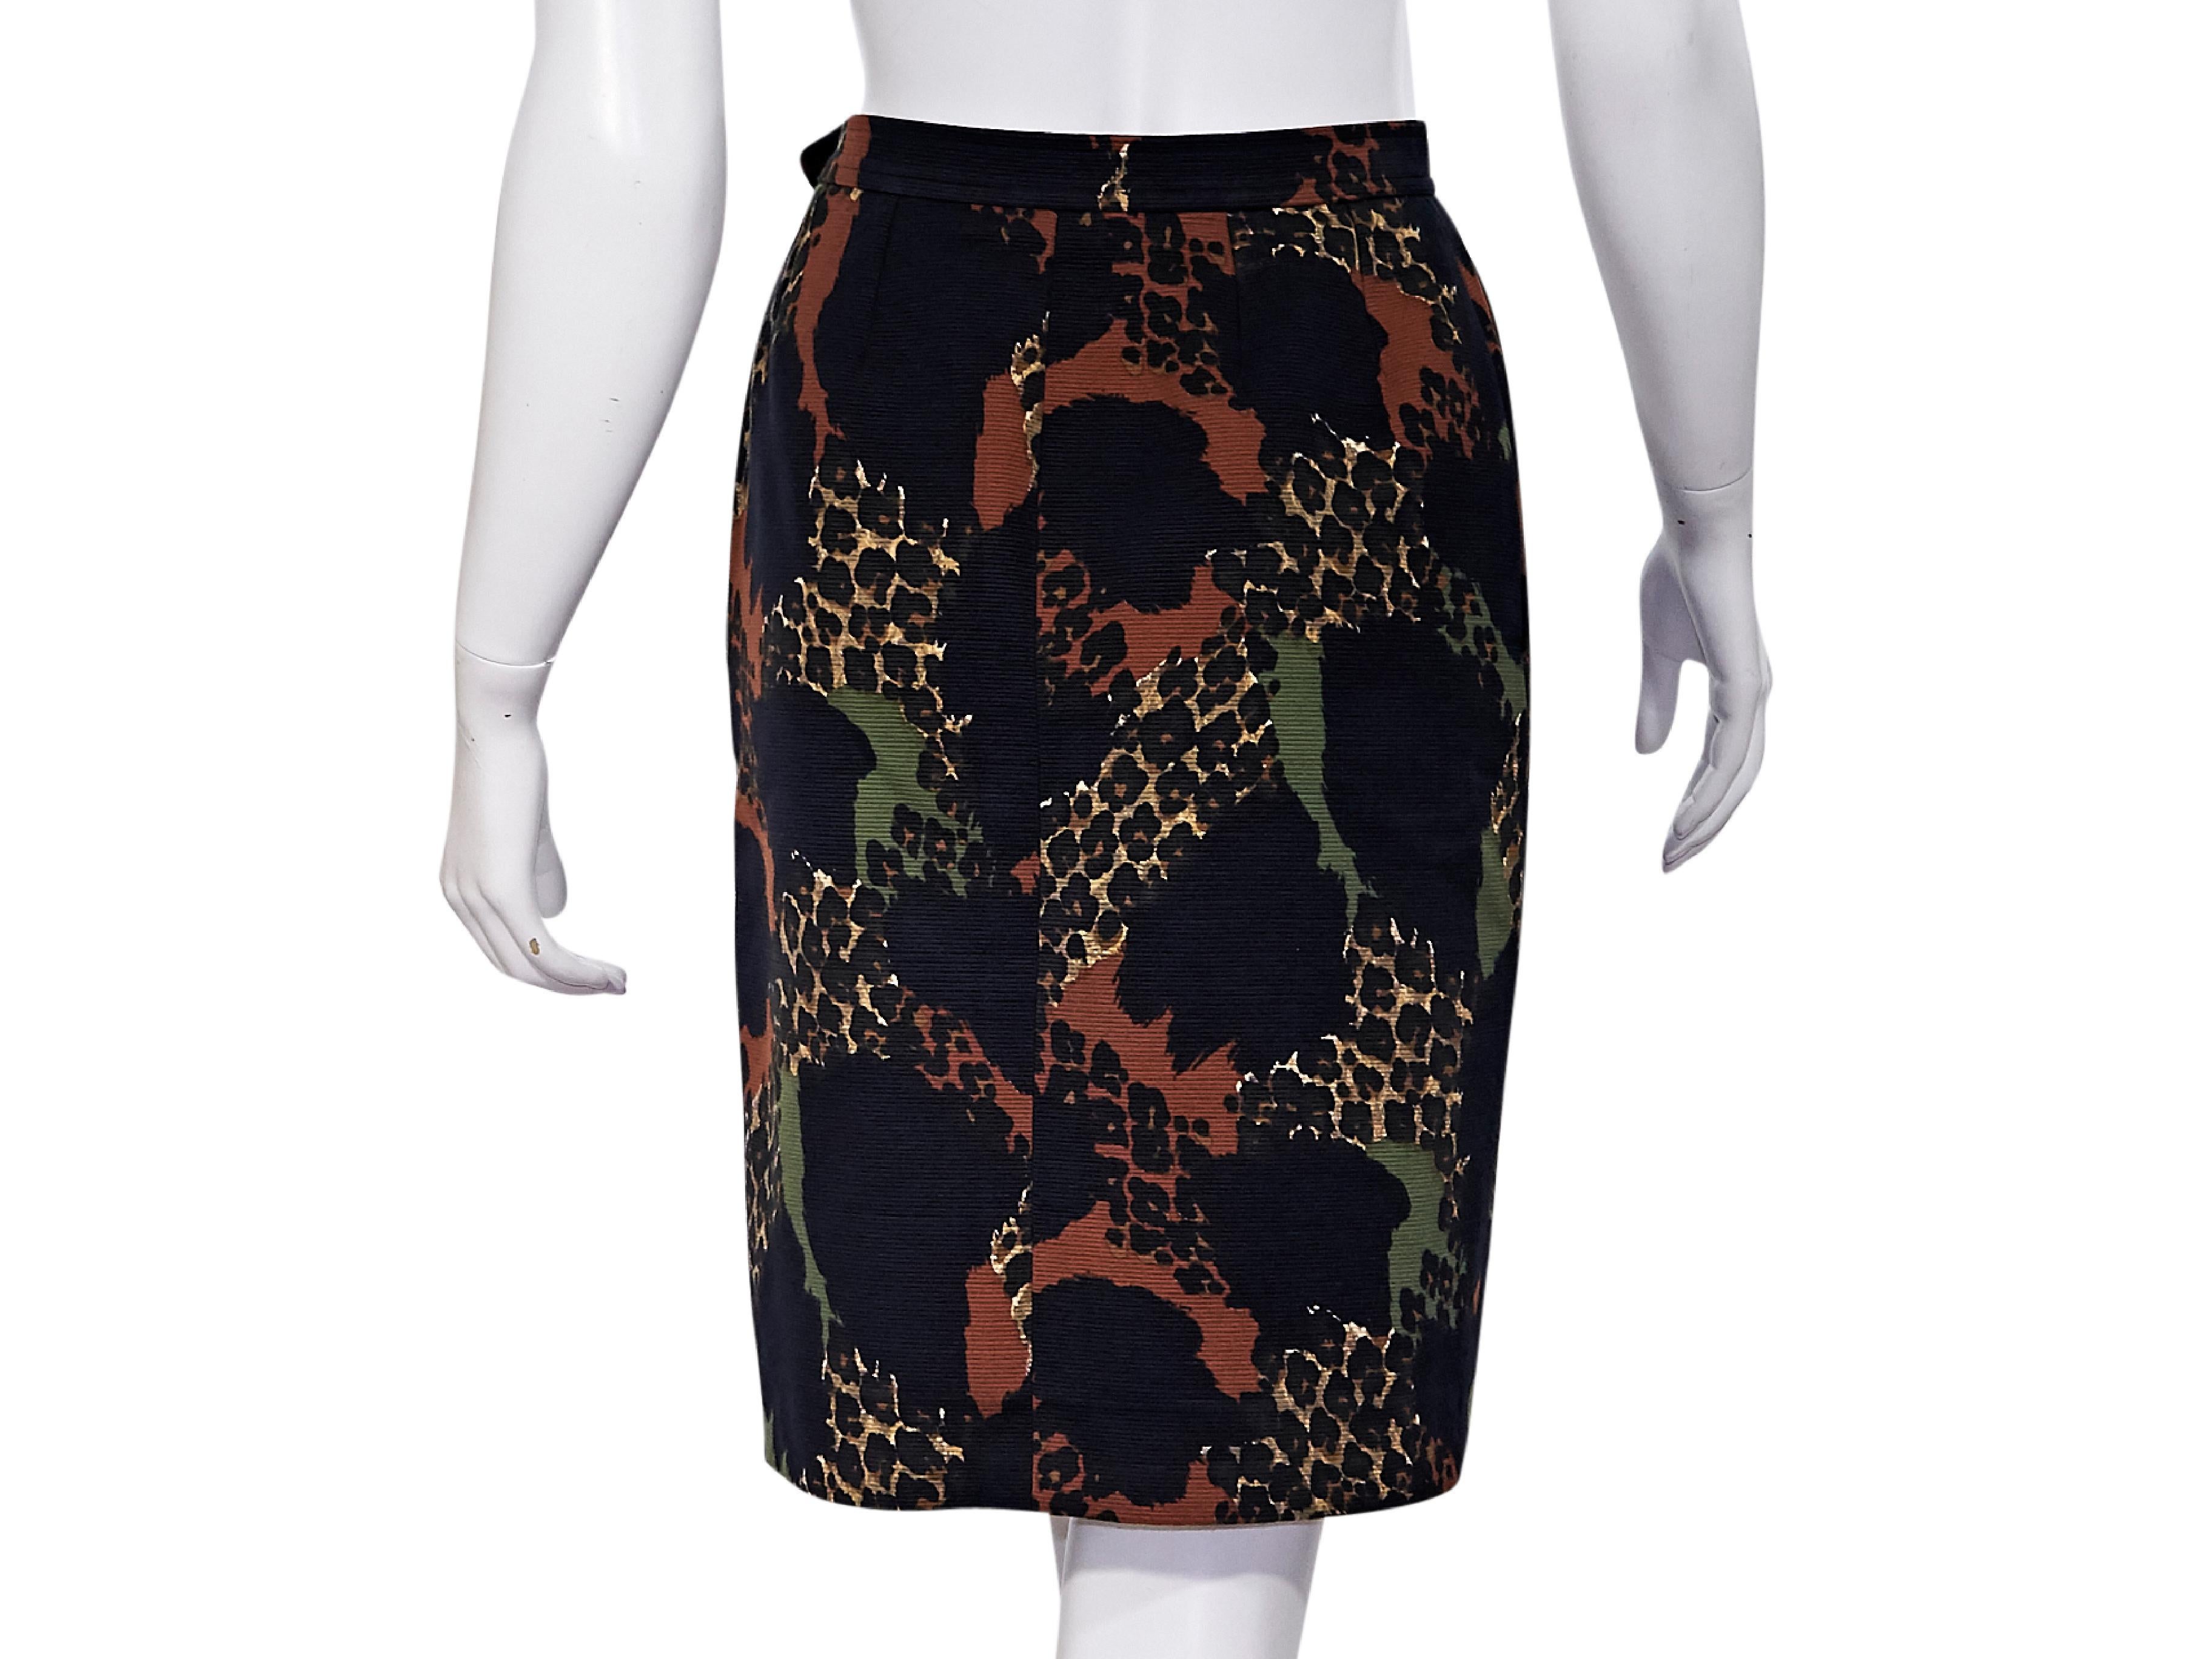 Product details:  Vintage multicolor textured pencil skirt by Yves Saint Laurent Rive Gauche.  Banded waist with side button closure.  Concealed side zip closure.  Waist slide pockets.  28